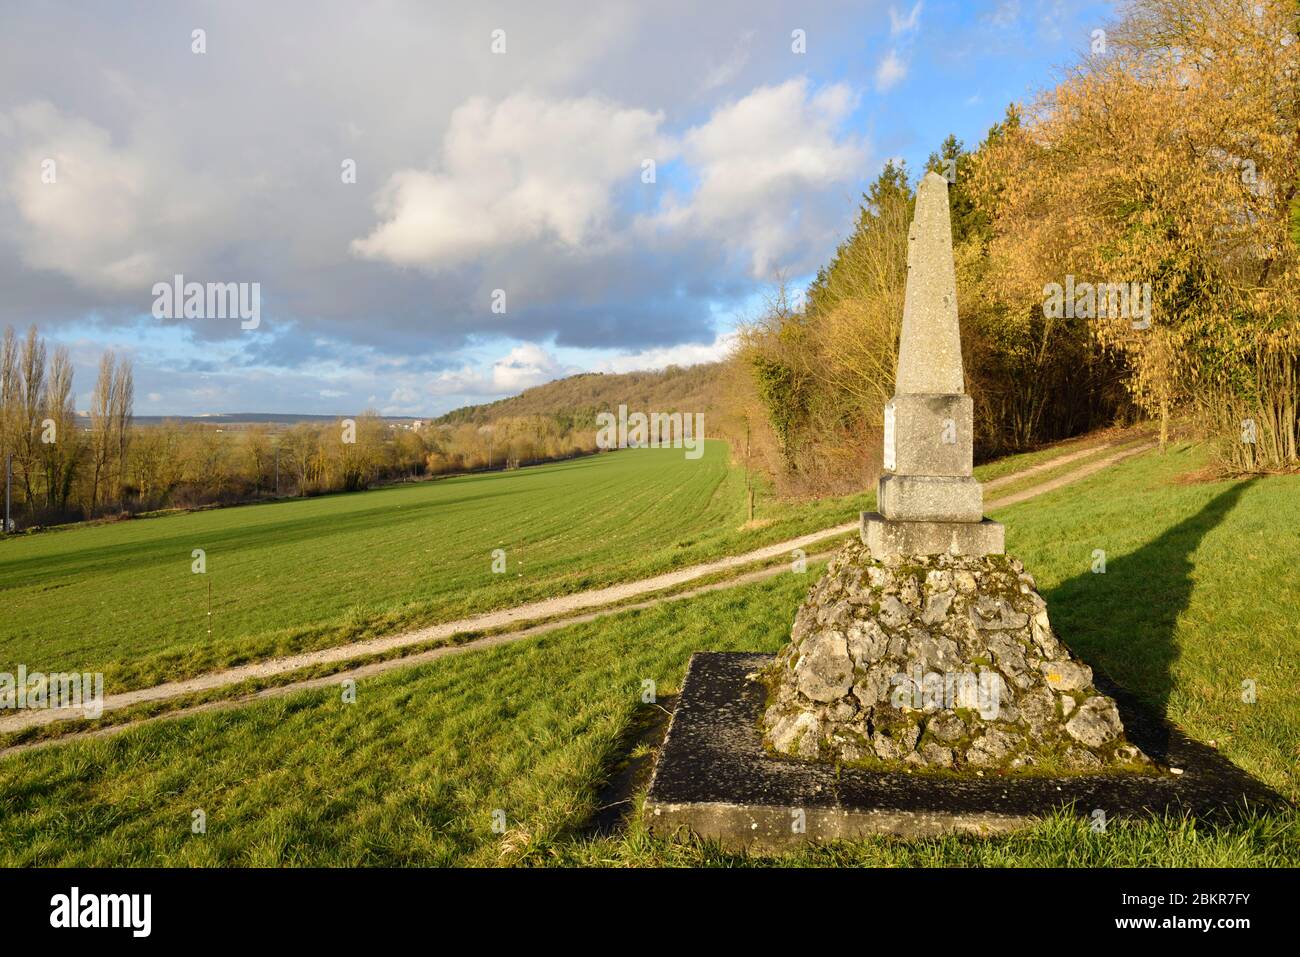 France, Meuse, Pagny sur Meuse, Notre Dame de Massey chapel dating from the 13th century and known to have received the visit of Joan of Arc who came to pray there in February 1429, monument commemorating the passage of Joan of Arc and view of the valley Stock Photo